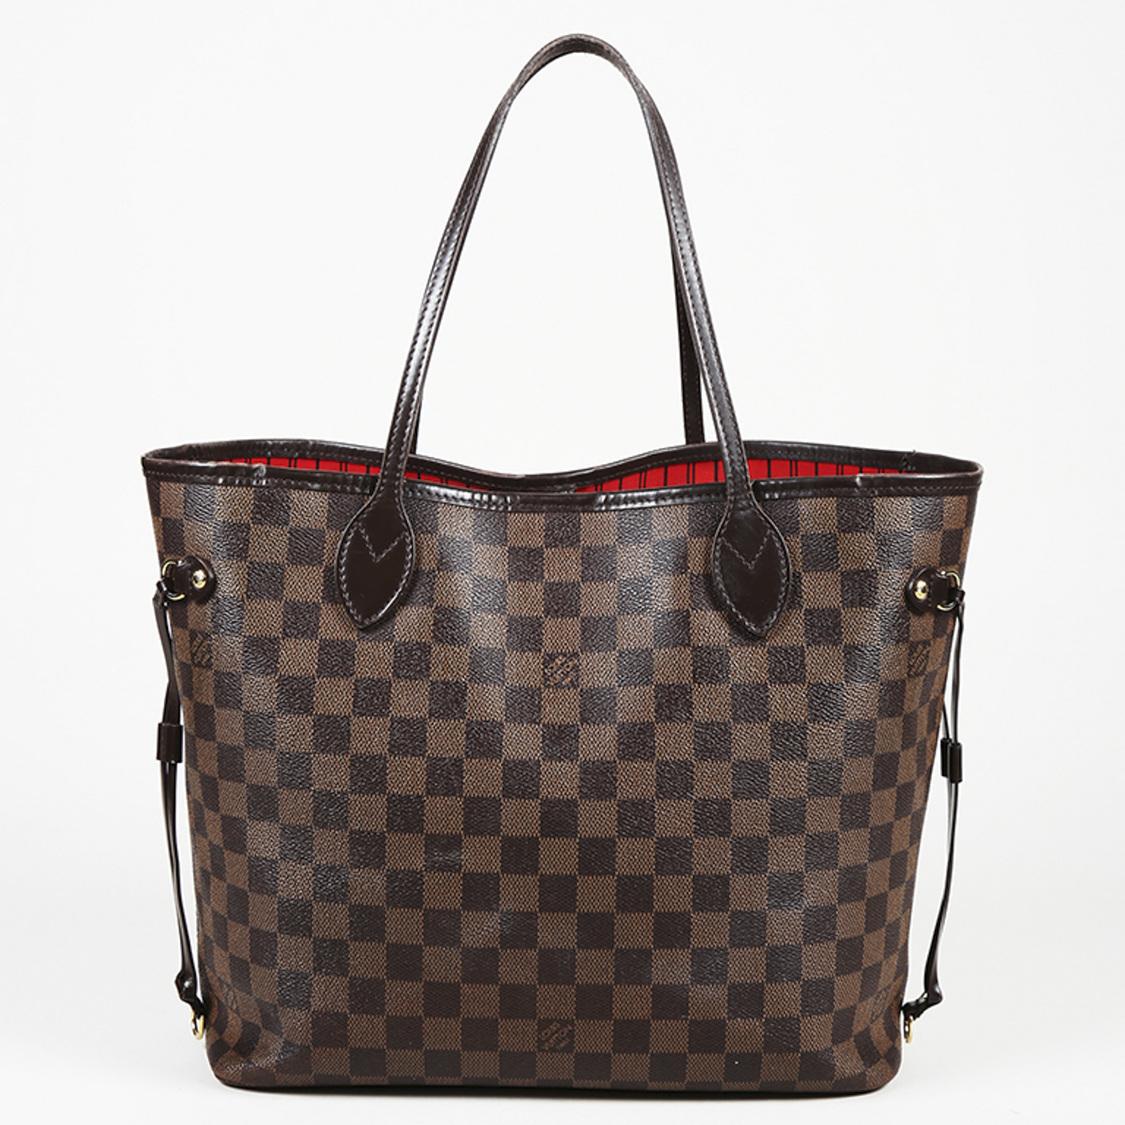 Lyst - Louis Vuitton Damier Ebene Coated Canvas &quot;neverfull Mm&quot; Tote Bag in Brown